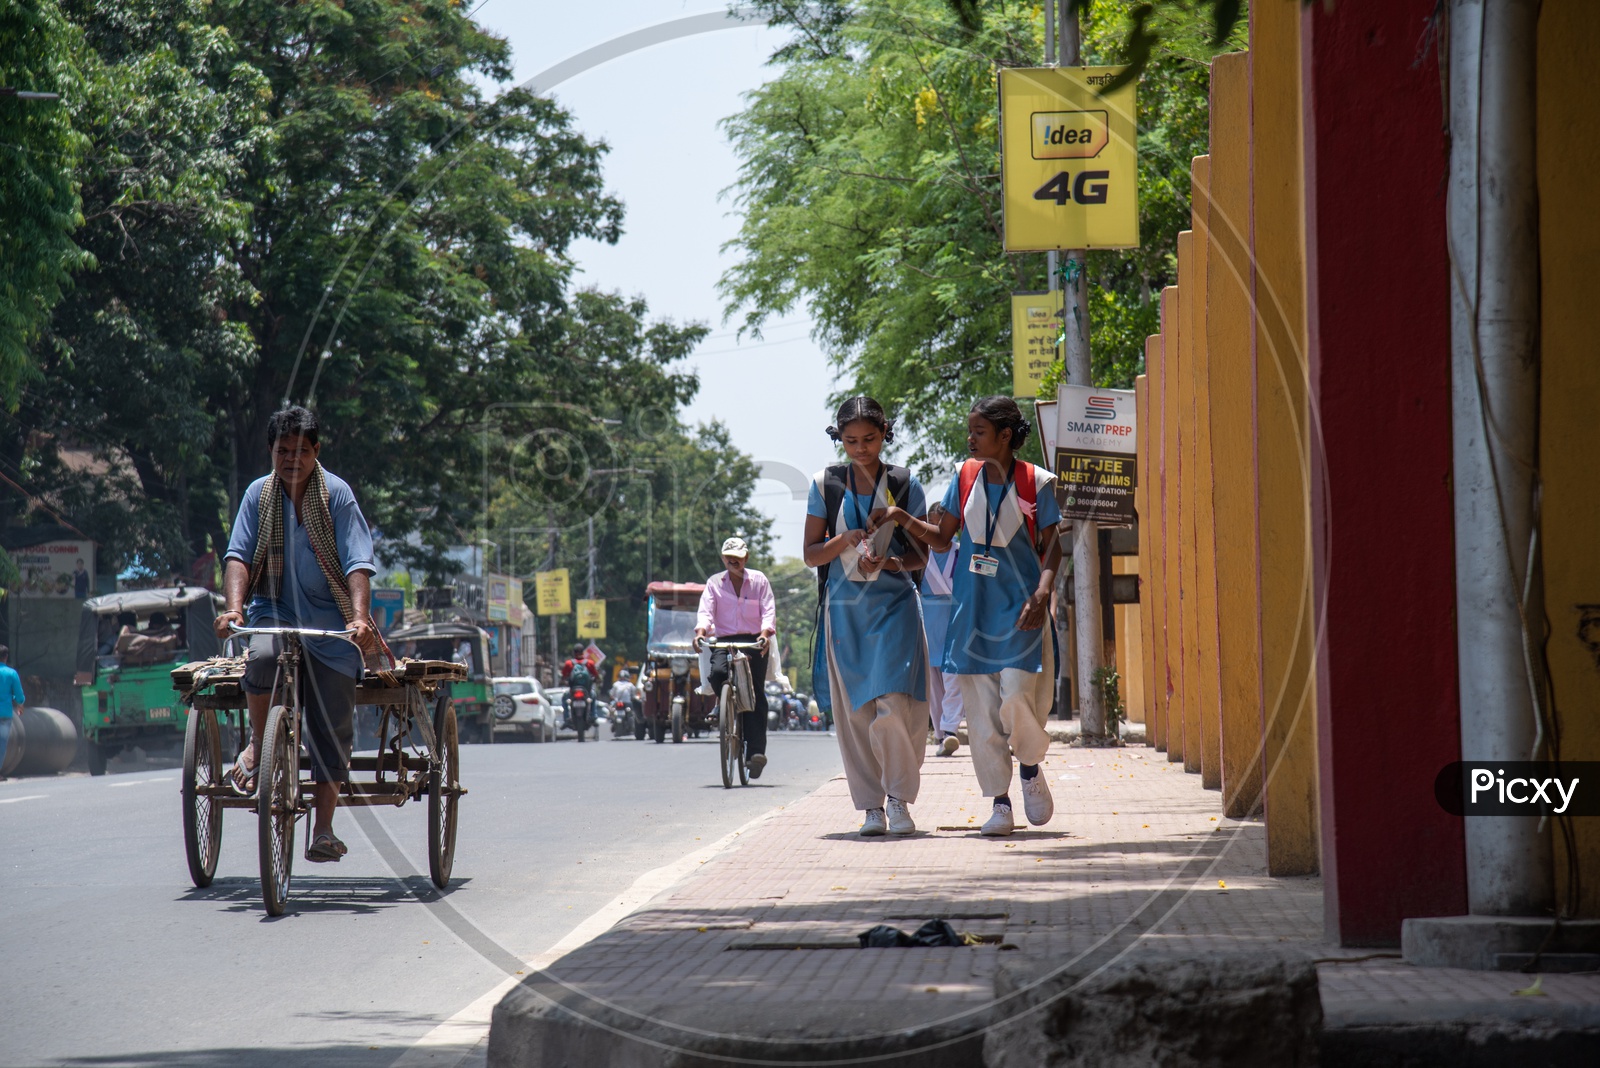 School Girls In Uniforms  Walking  on Footpaths While Going To School